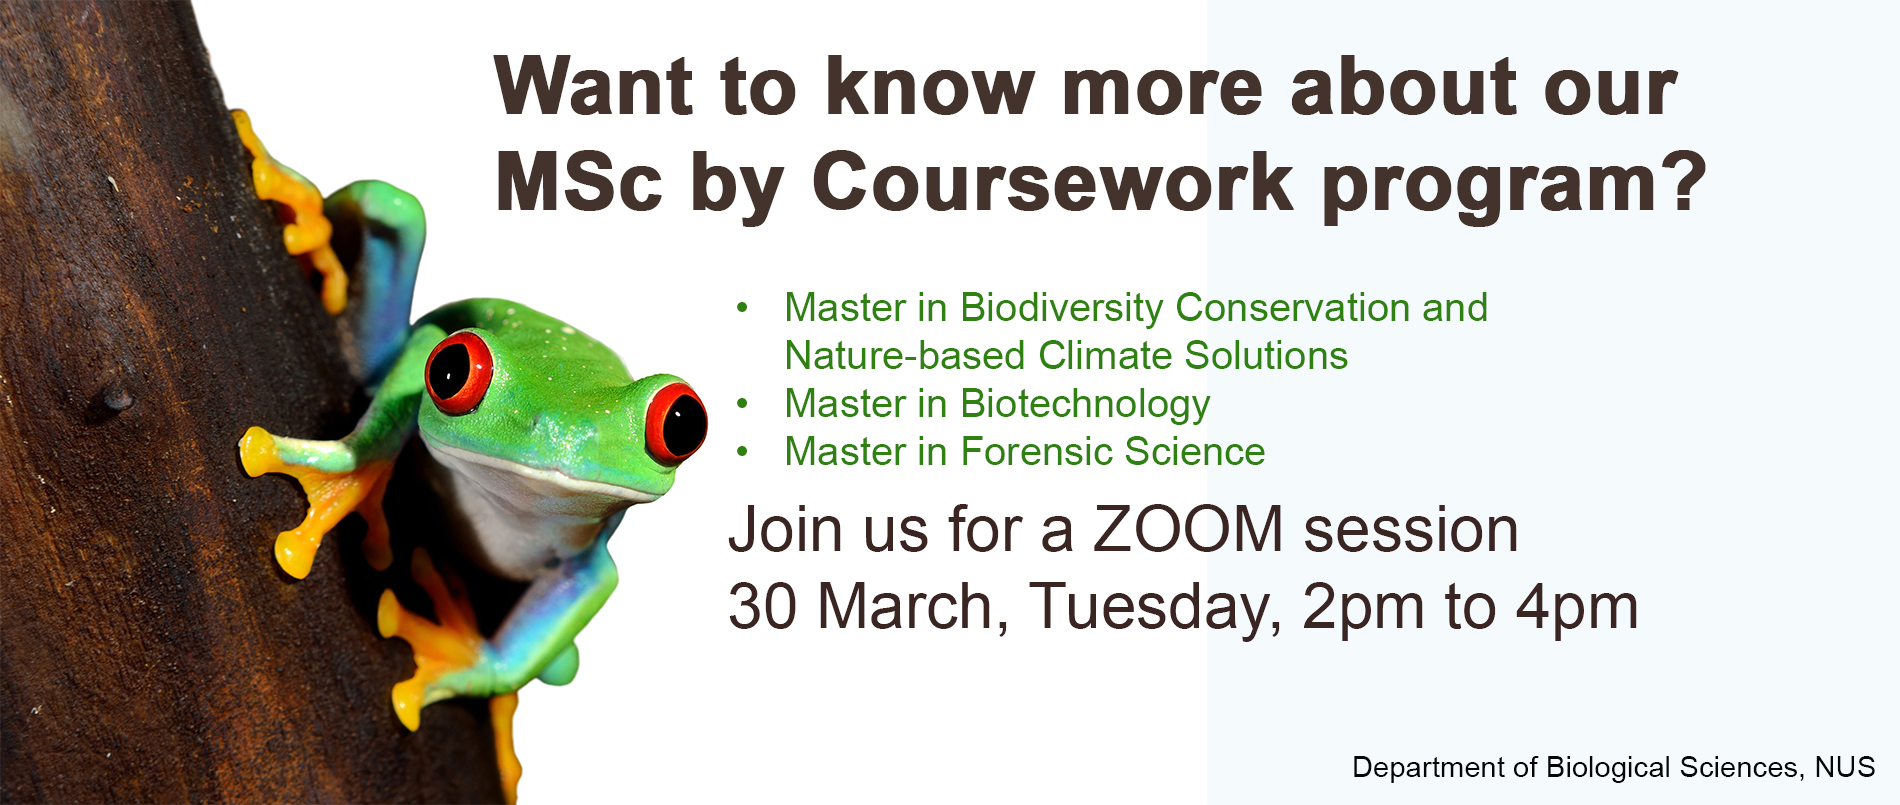 MSc by Coursework Programme e-open house